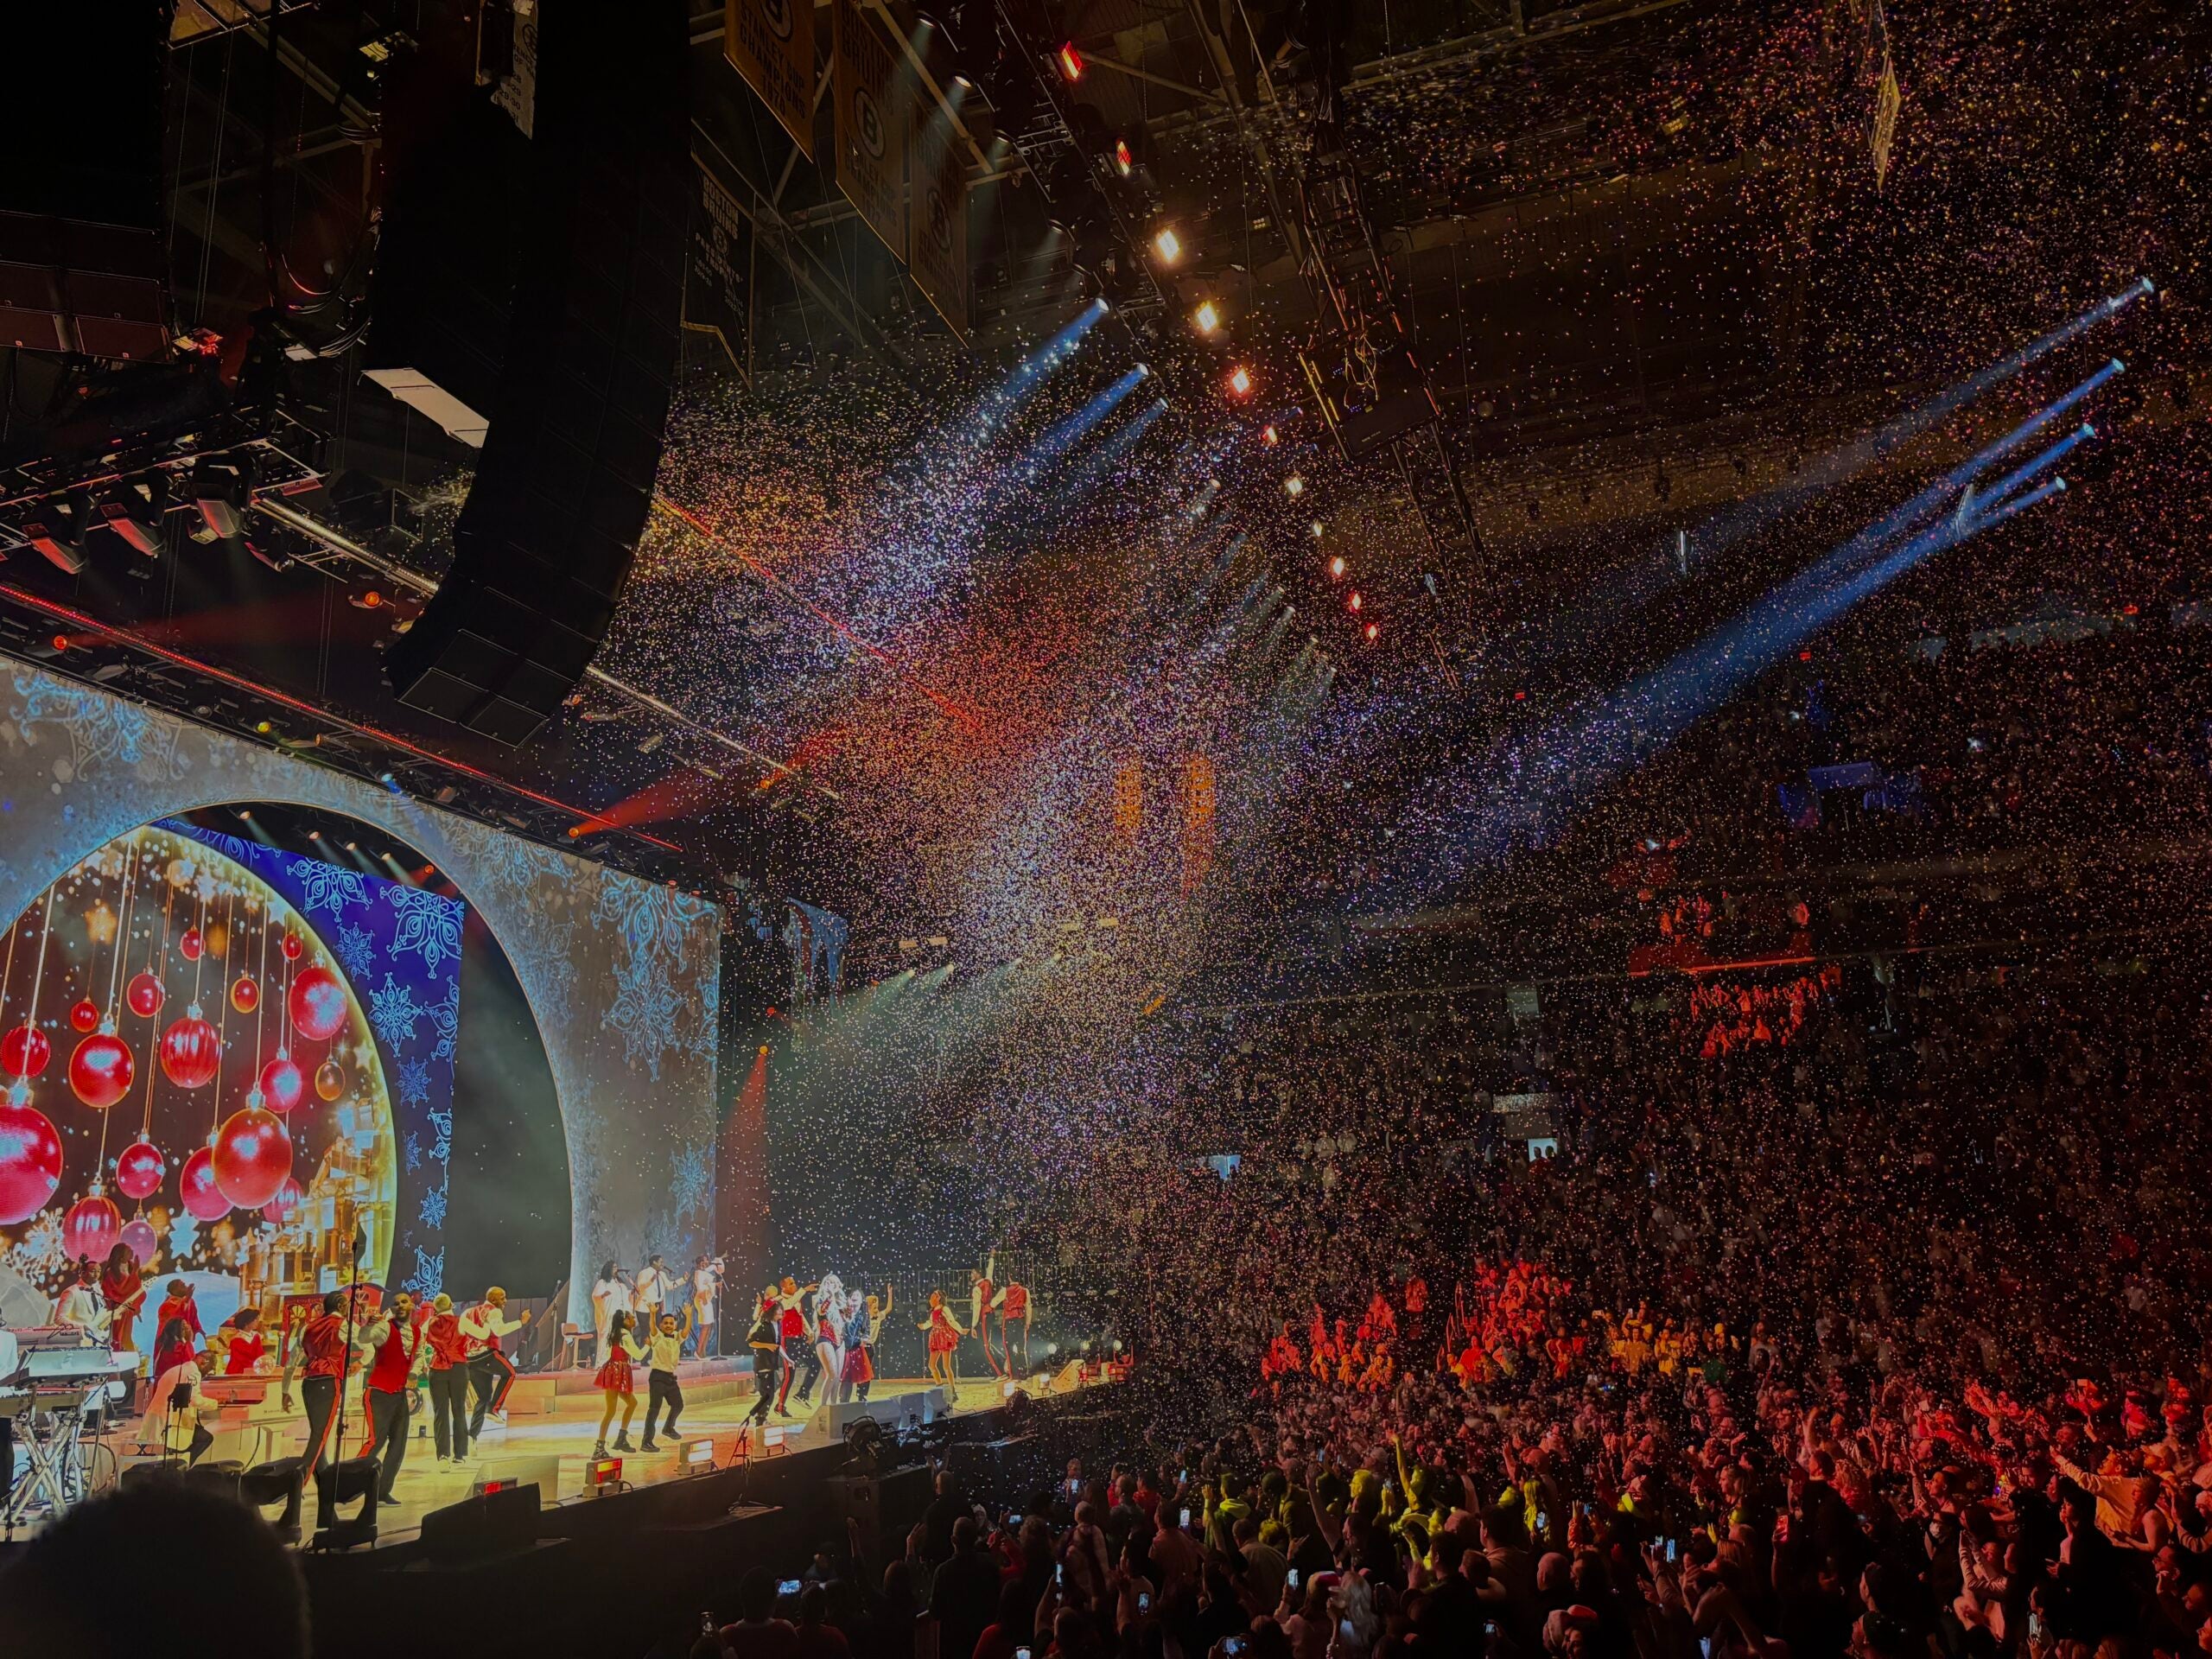 Confetti falls on the crowd during "All I Want For Christmas Is You" at TD Garden Monday, Dec. 11.